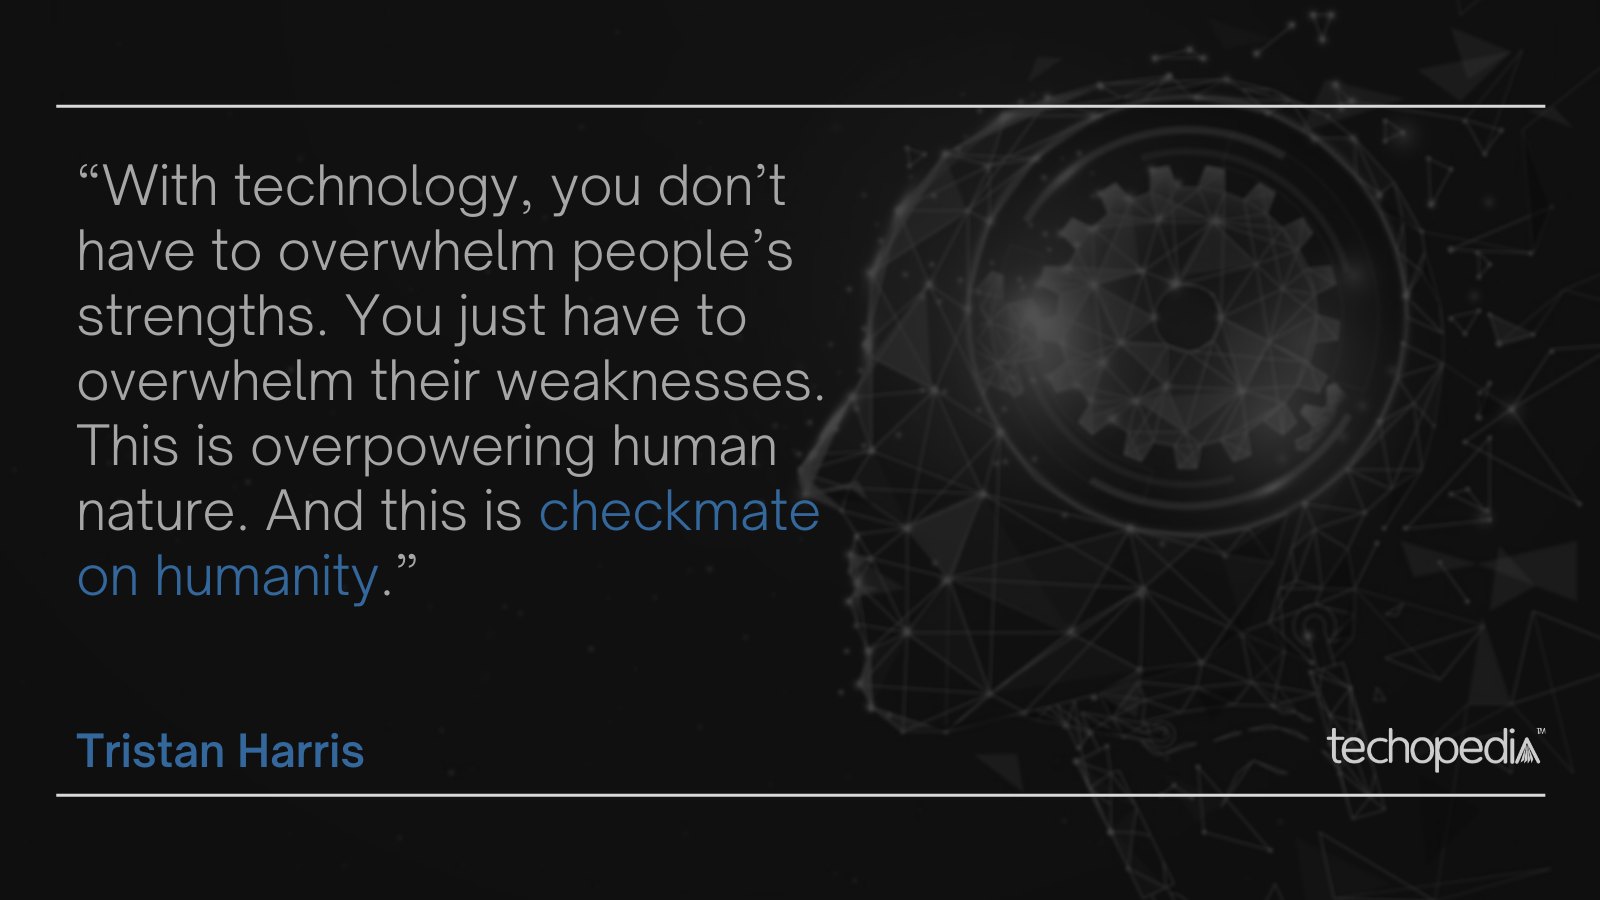 11 Quotes About AI That'll Make You Think